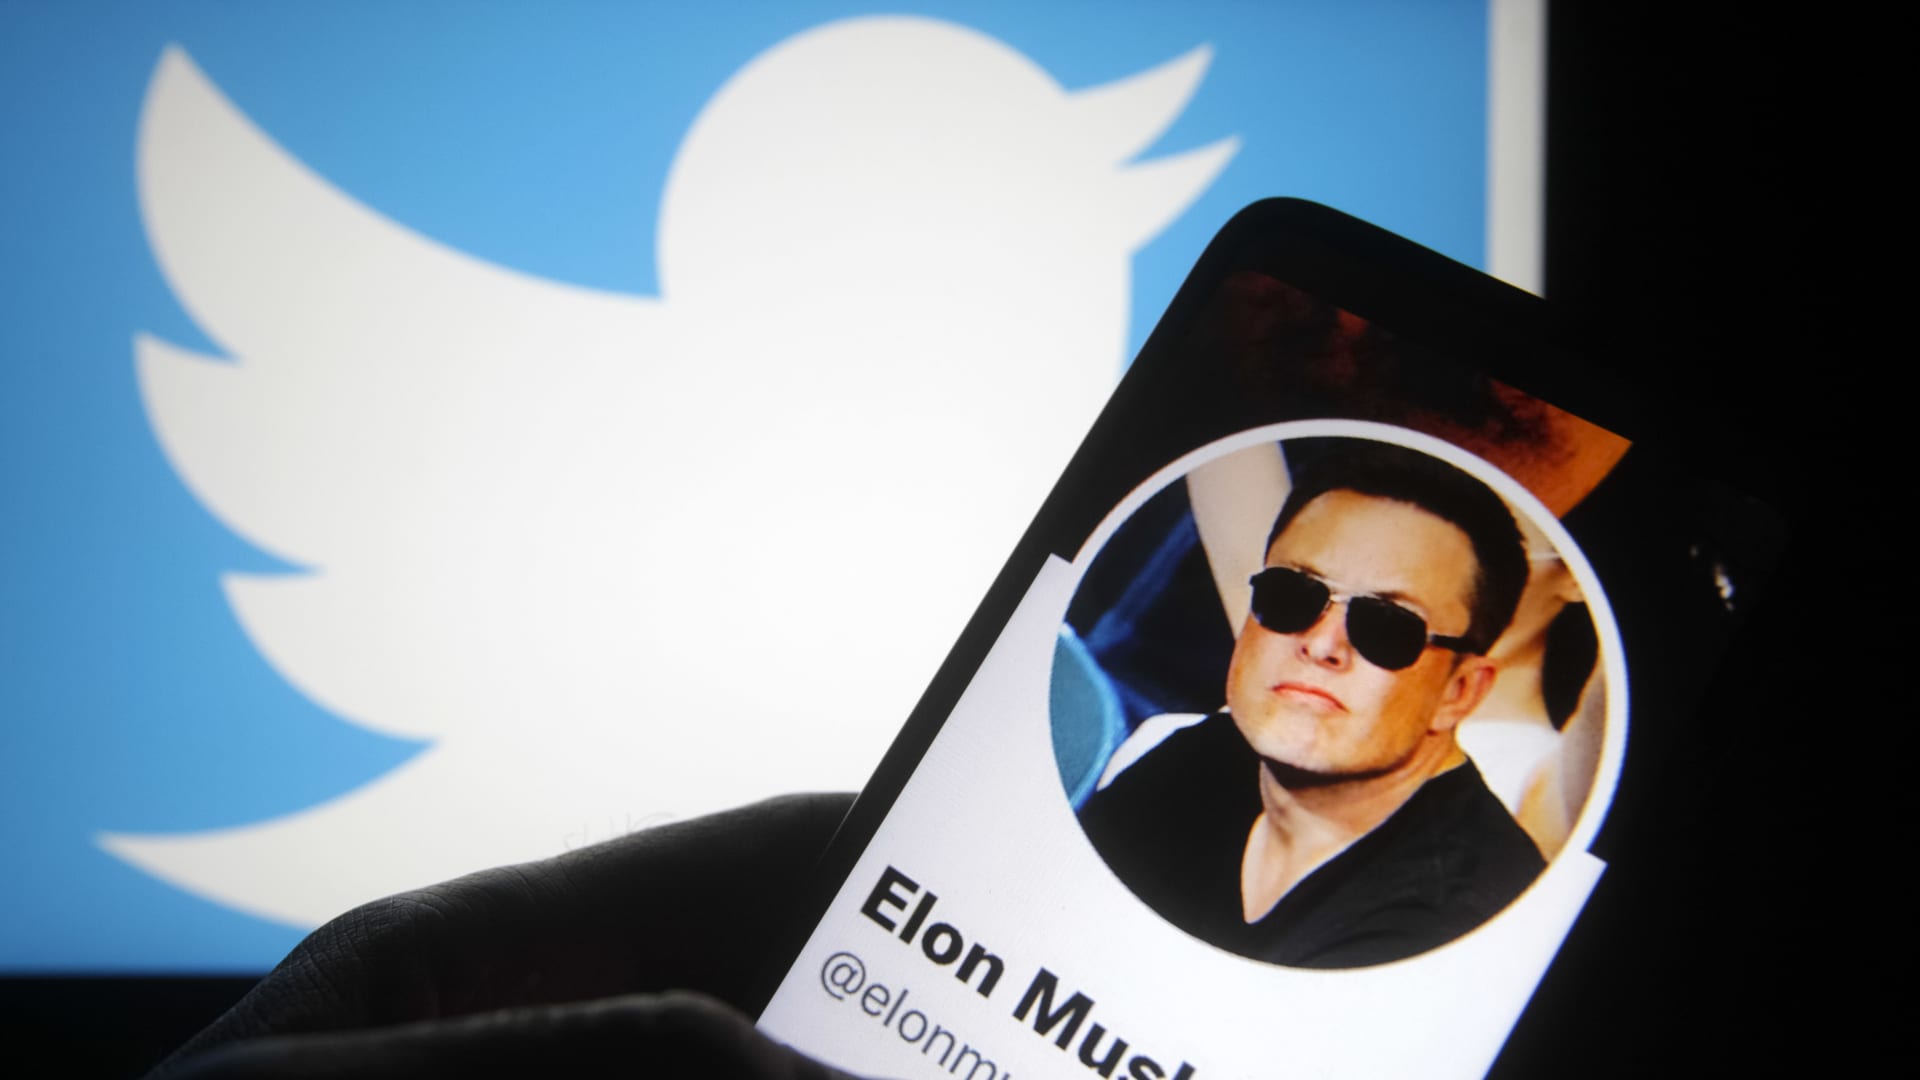 Musk’s Twitter deal faces backlash from advocacy groups